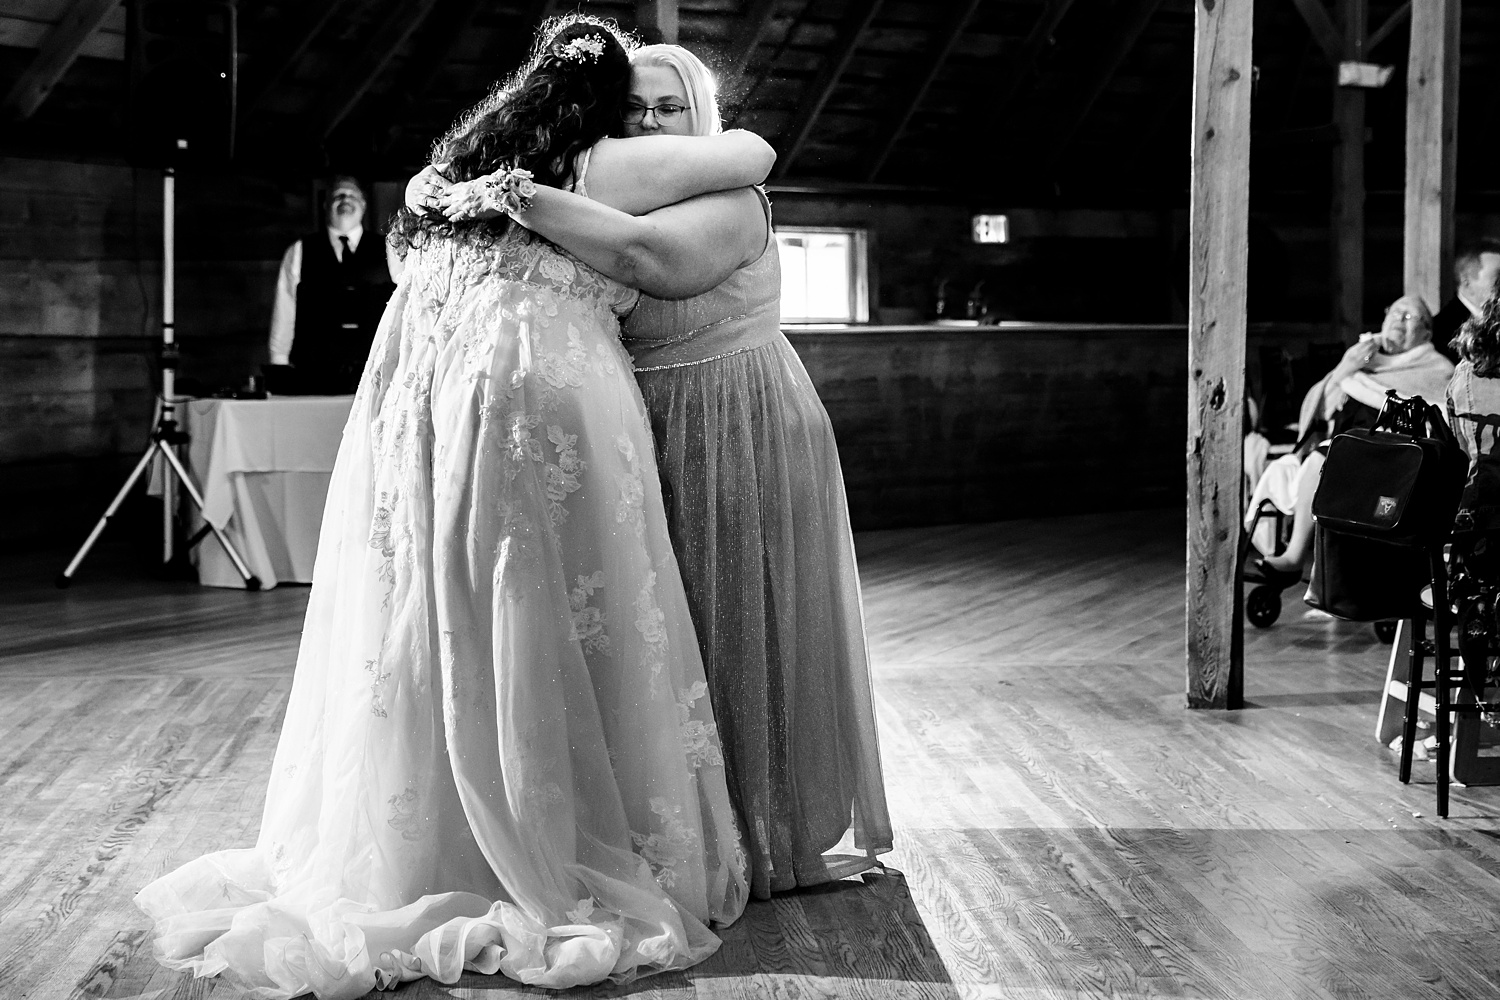 The bride and her mom share a hug on the dance floor